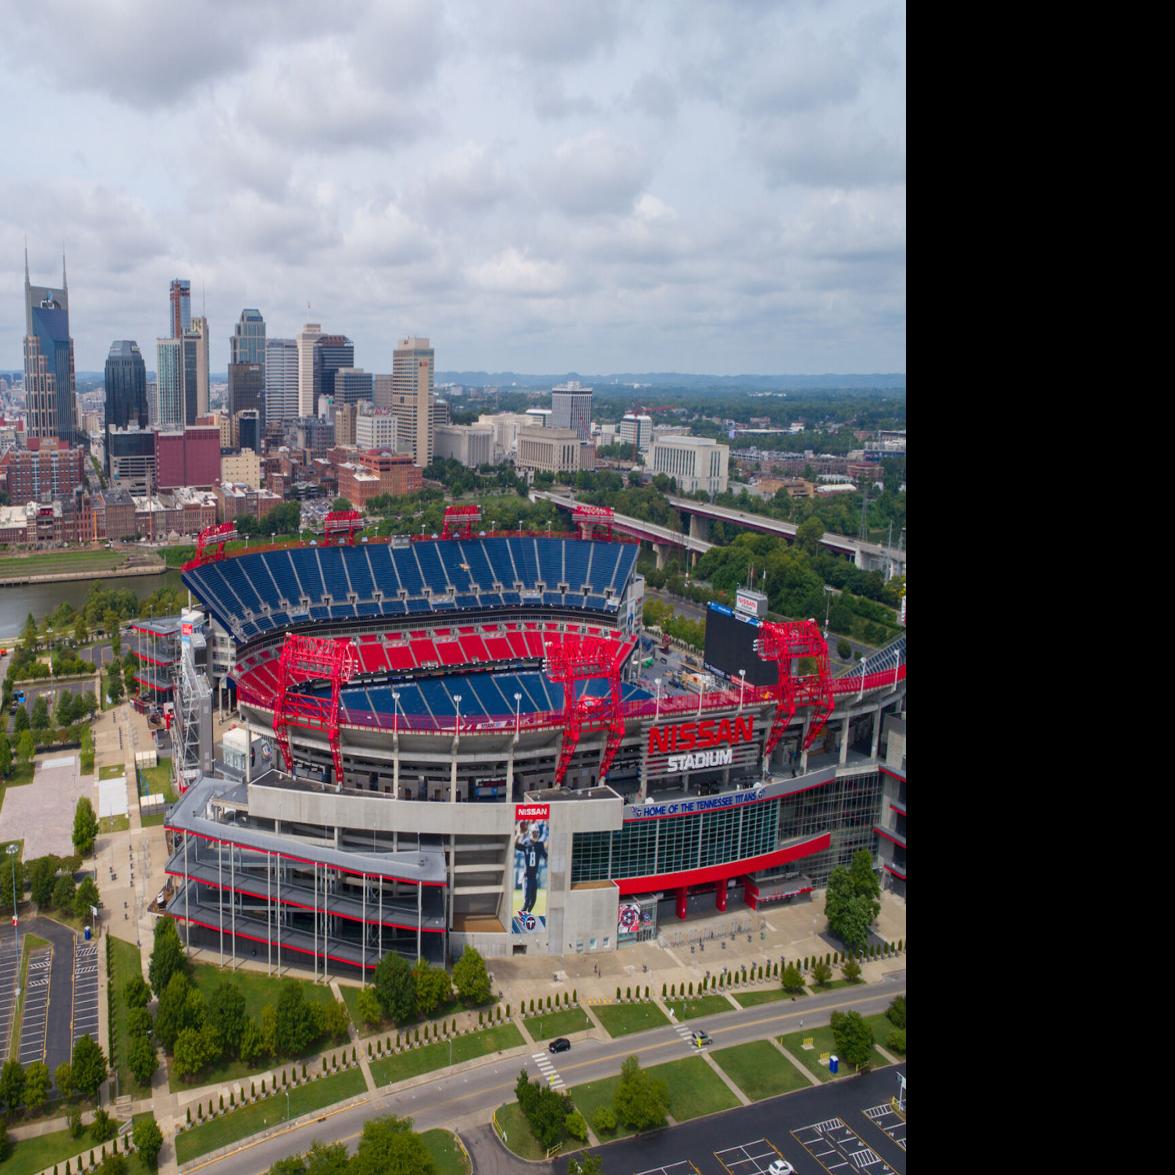 Large tax implications for a new Titans stadium in Nashville